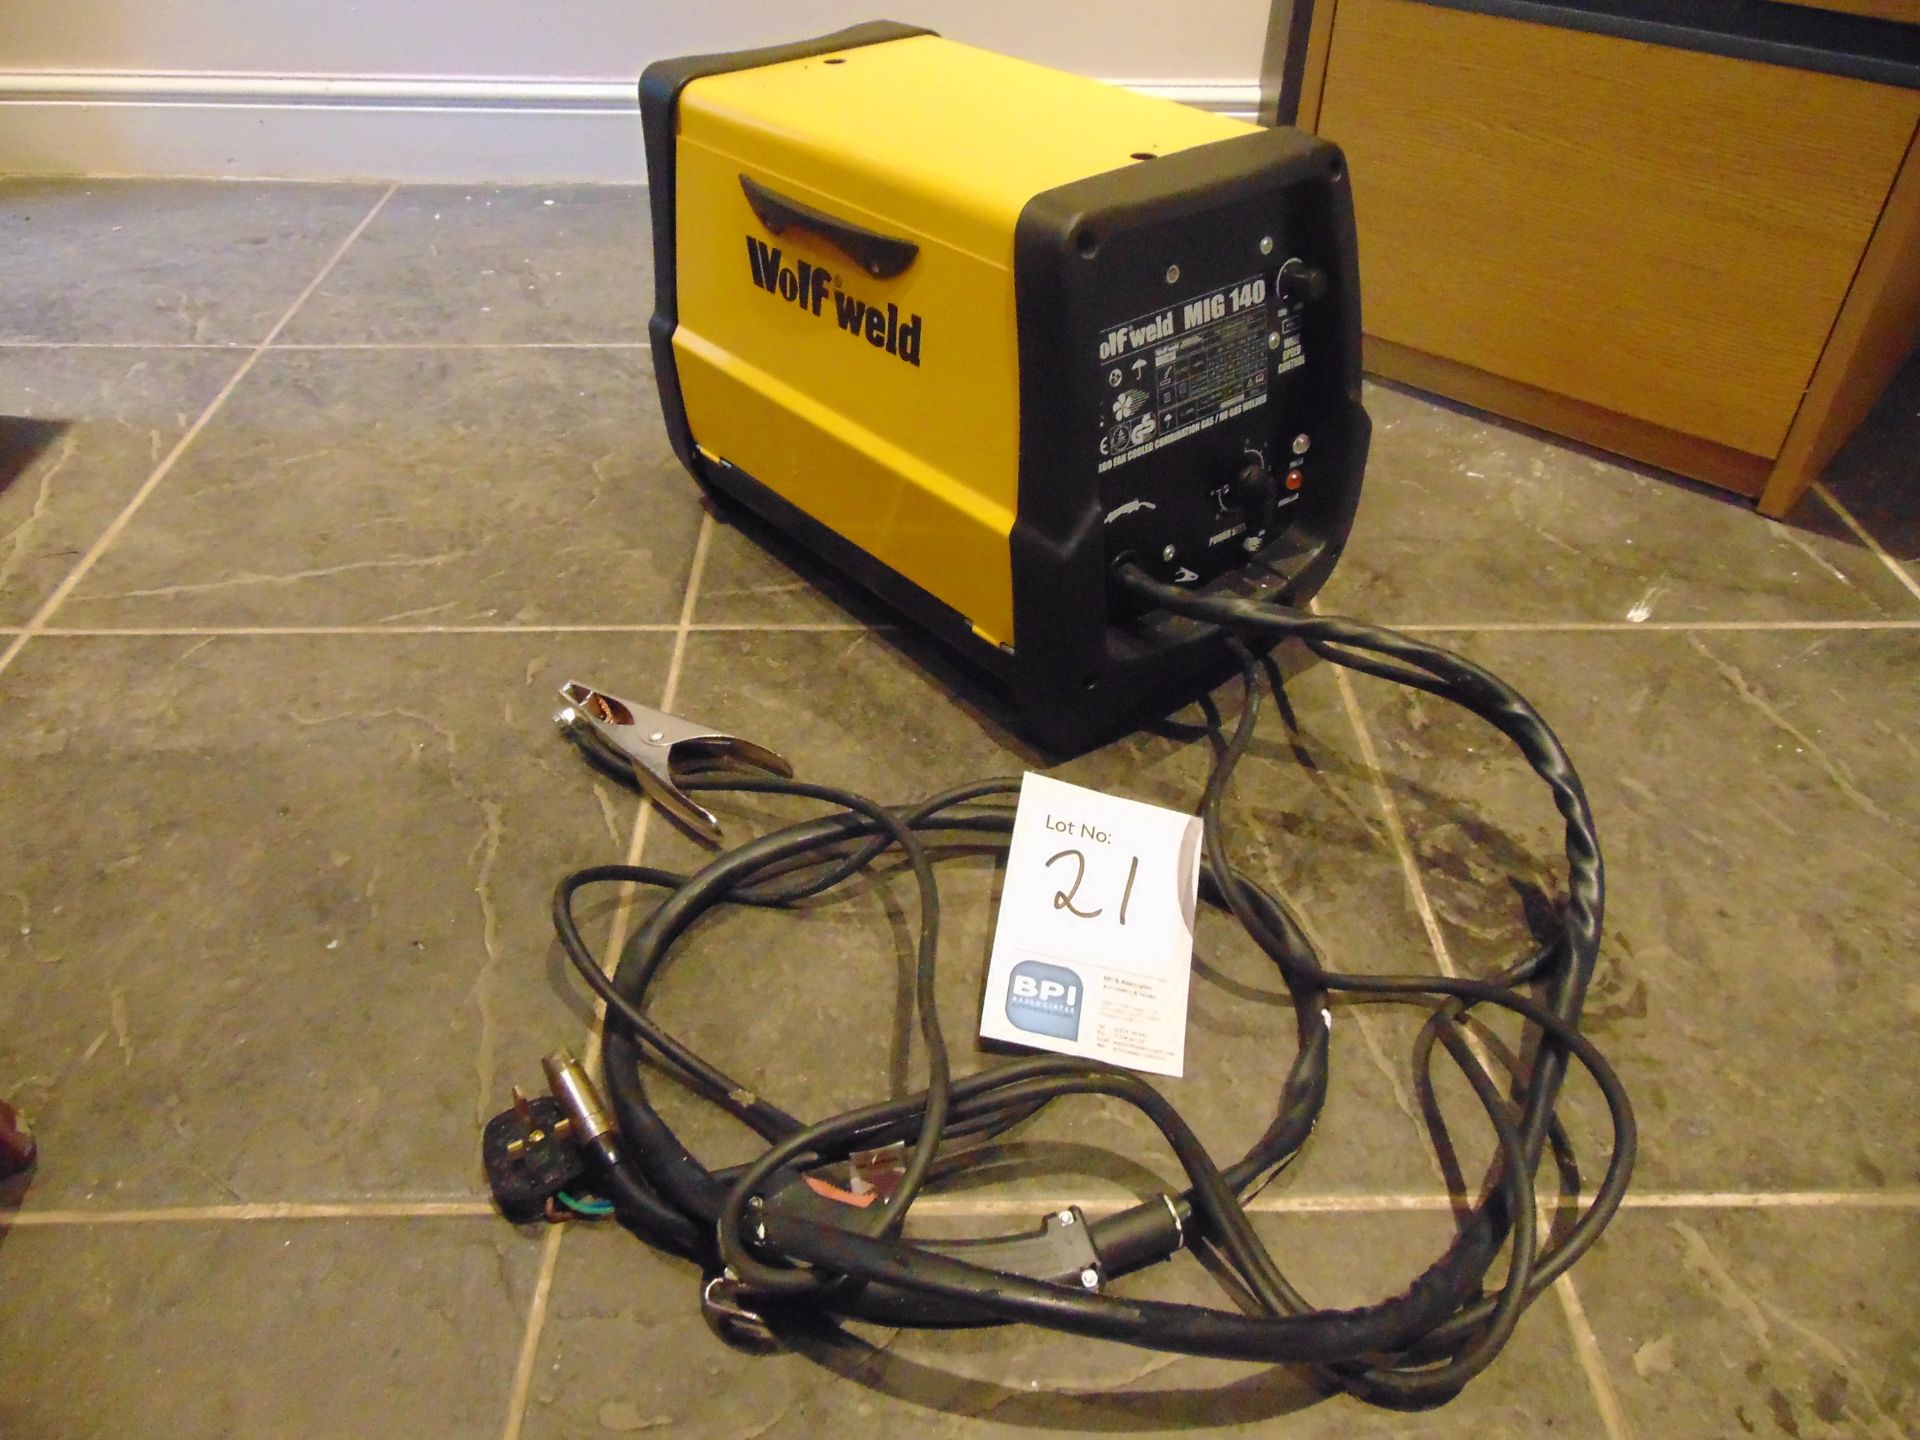 Wolfweld 140amp mig welder- still in box never used- cost over £400.00